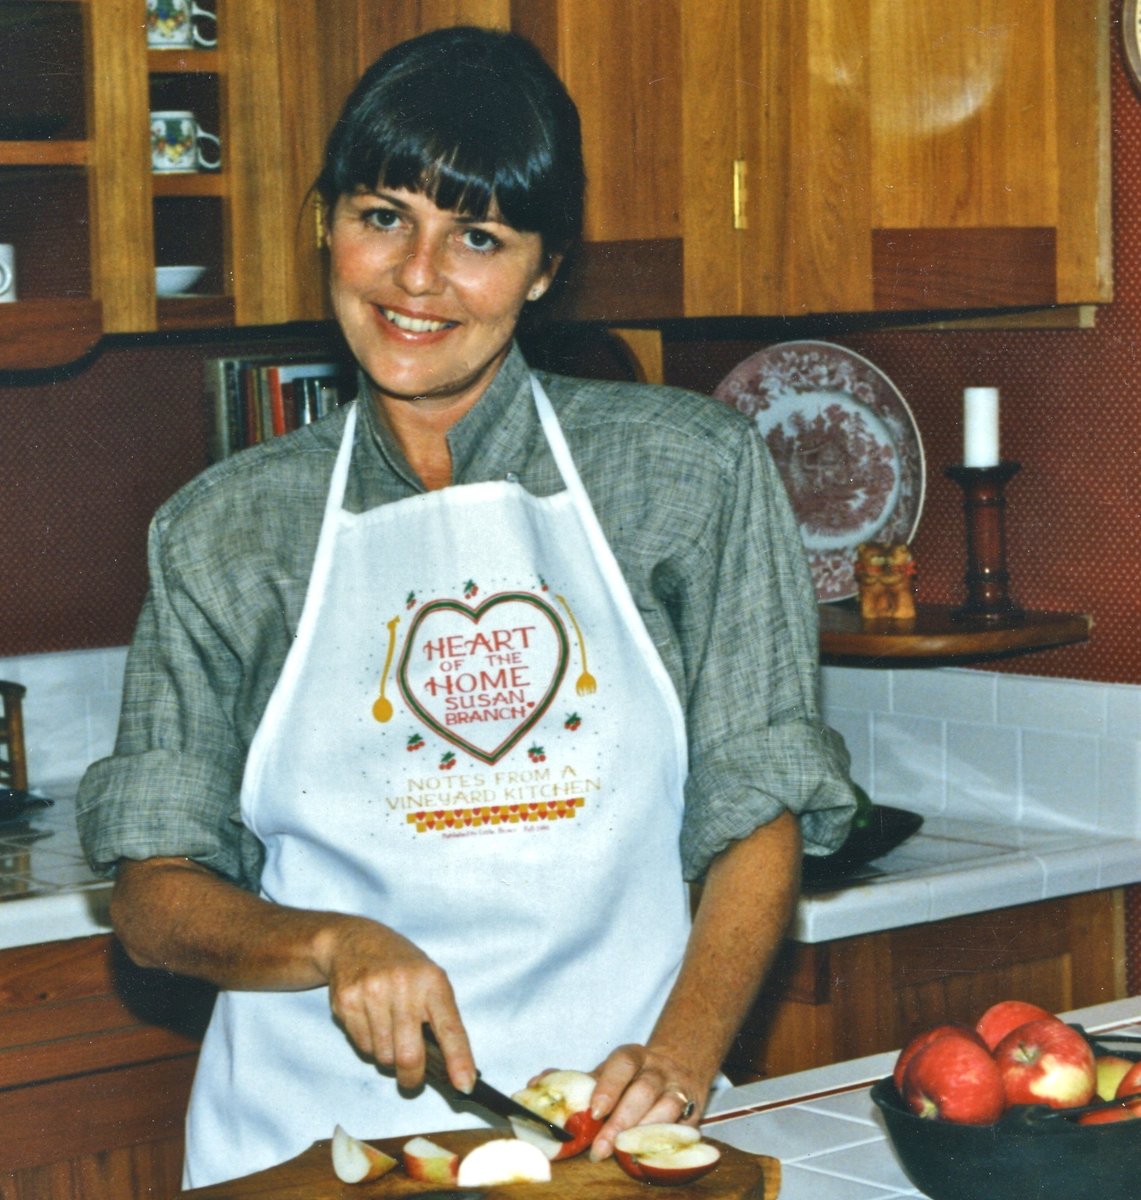 Digging through photos ... this is me about a month before my first date with Joe, Christmas 1986 in my kitchen at Holly Oak . . . Heart of the Home, my first book, had just come out the month before. Lots of changes coming to my life at that moment. But I didn't know yet!